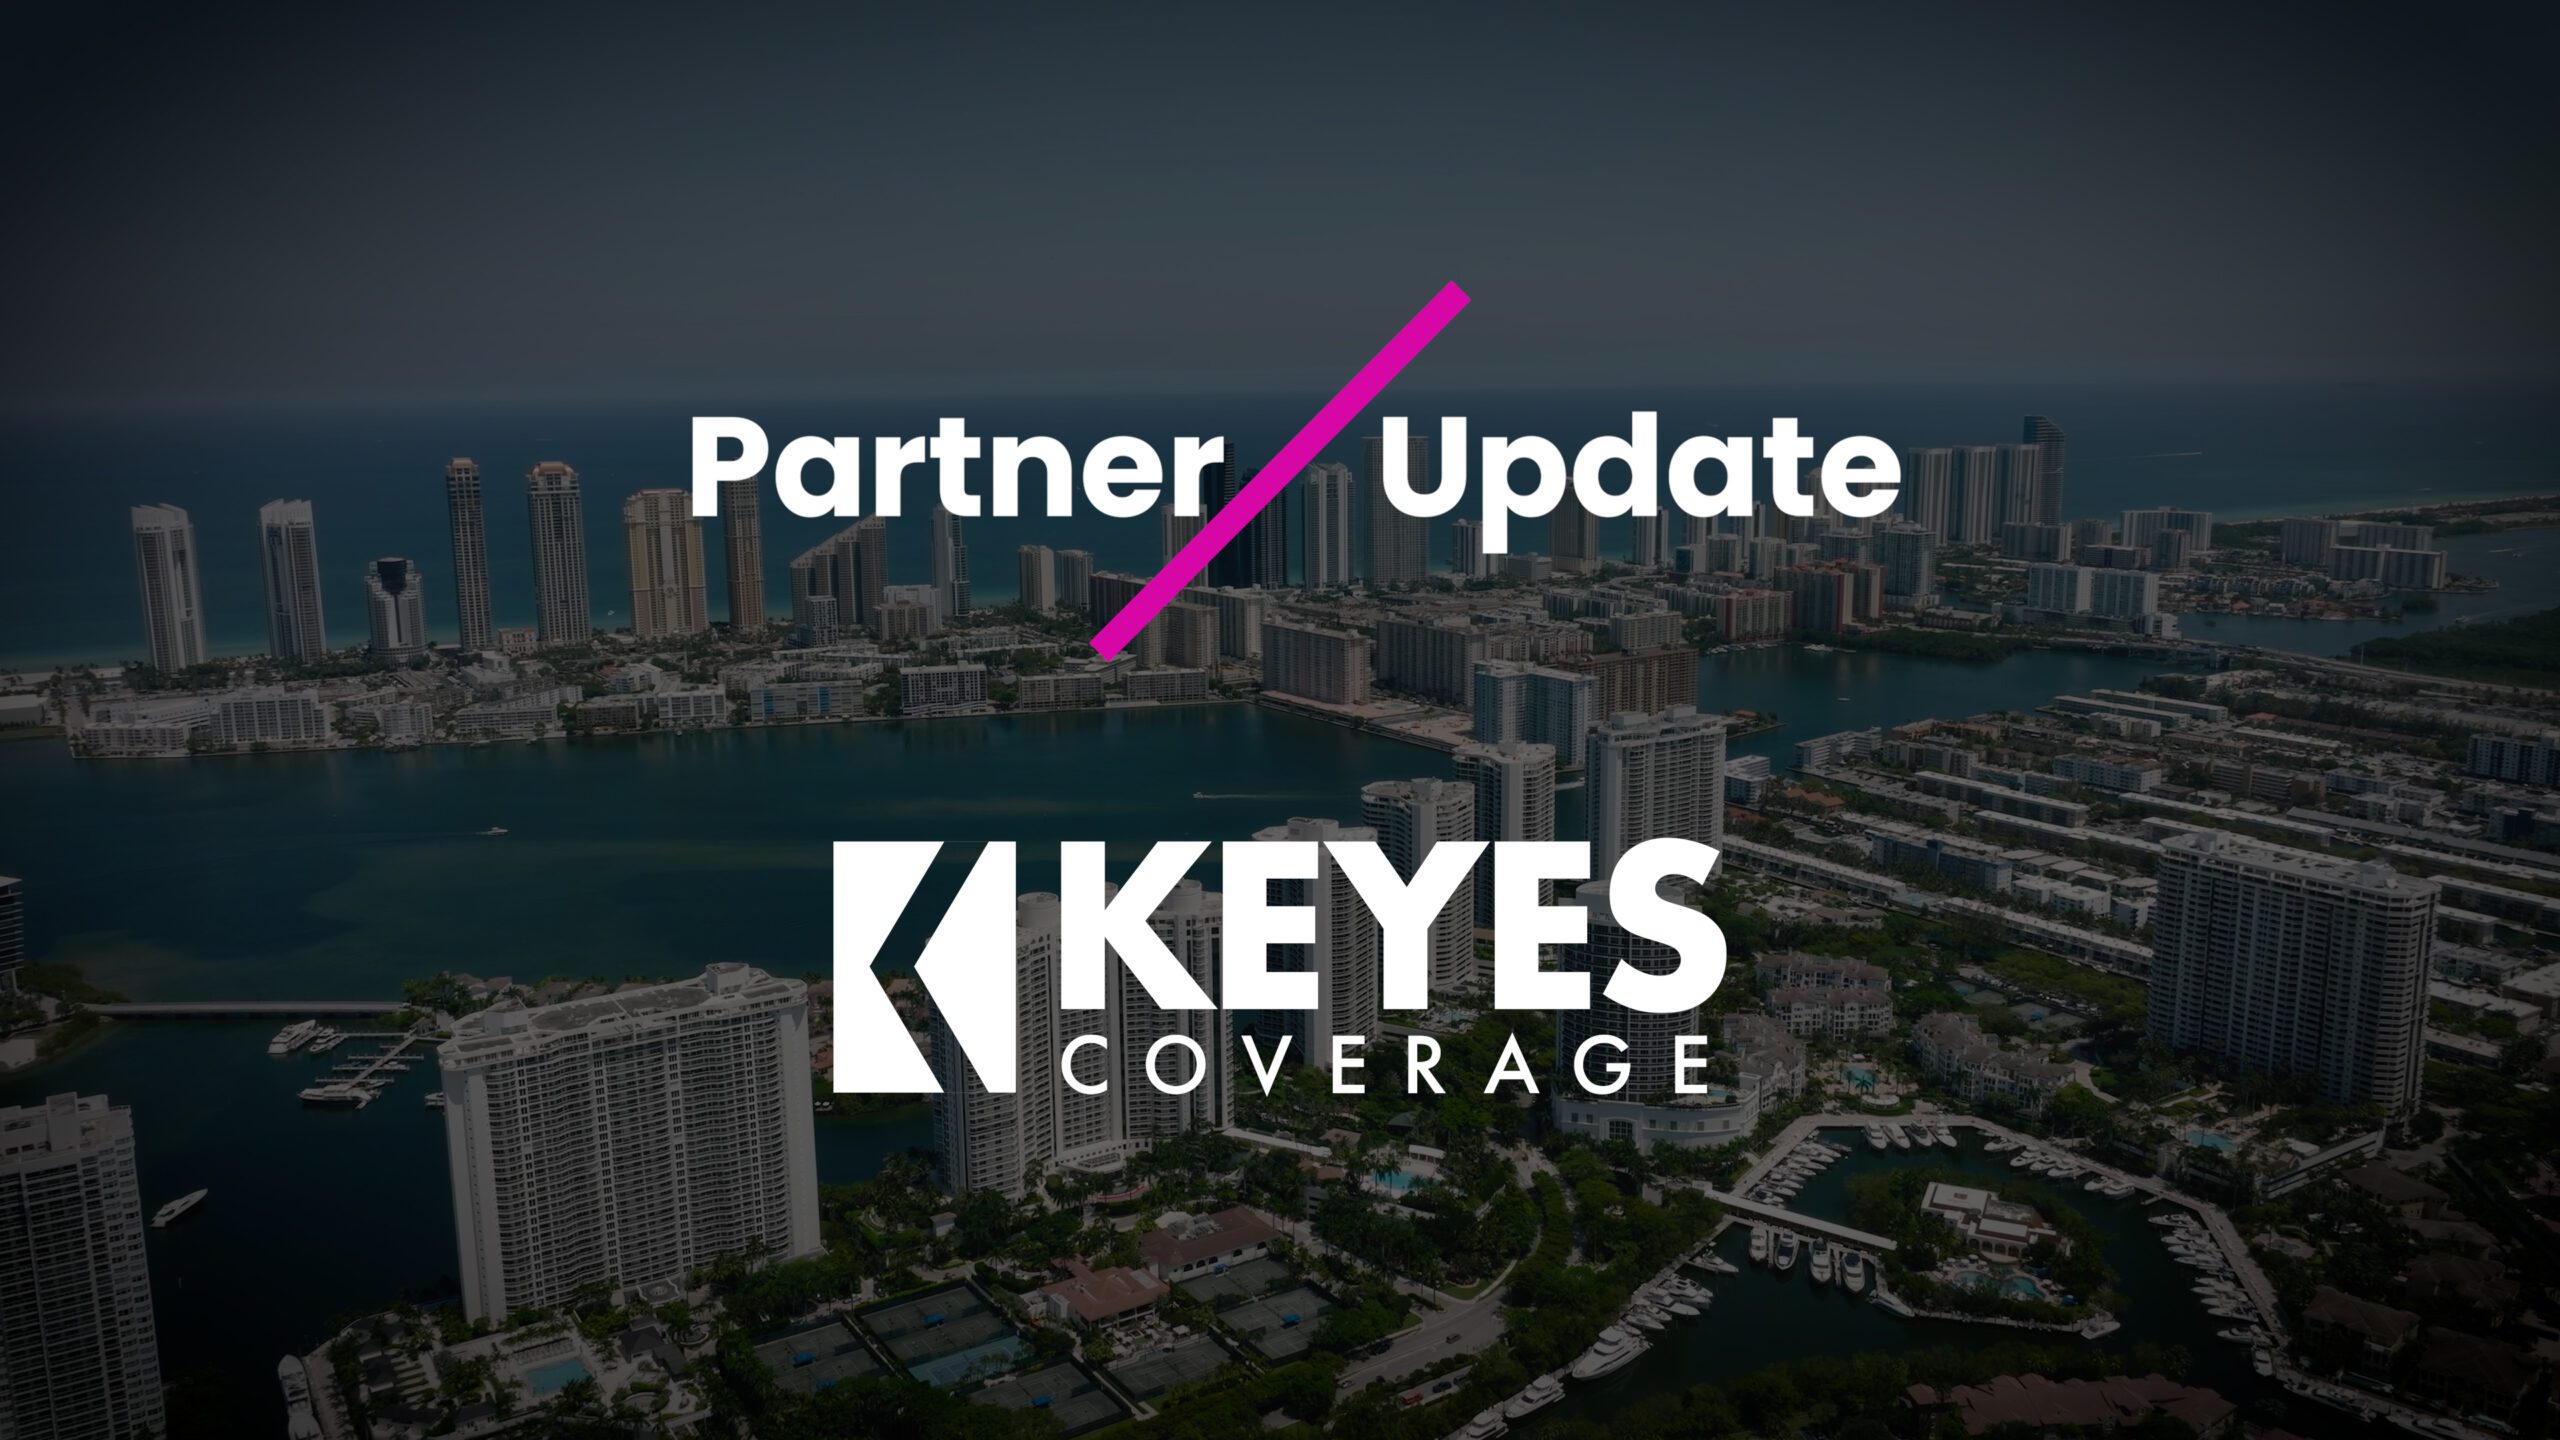 Keyes Coverage Continues Growth